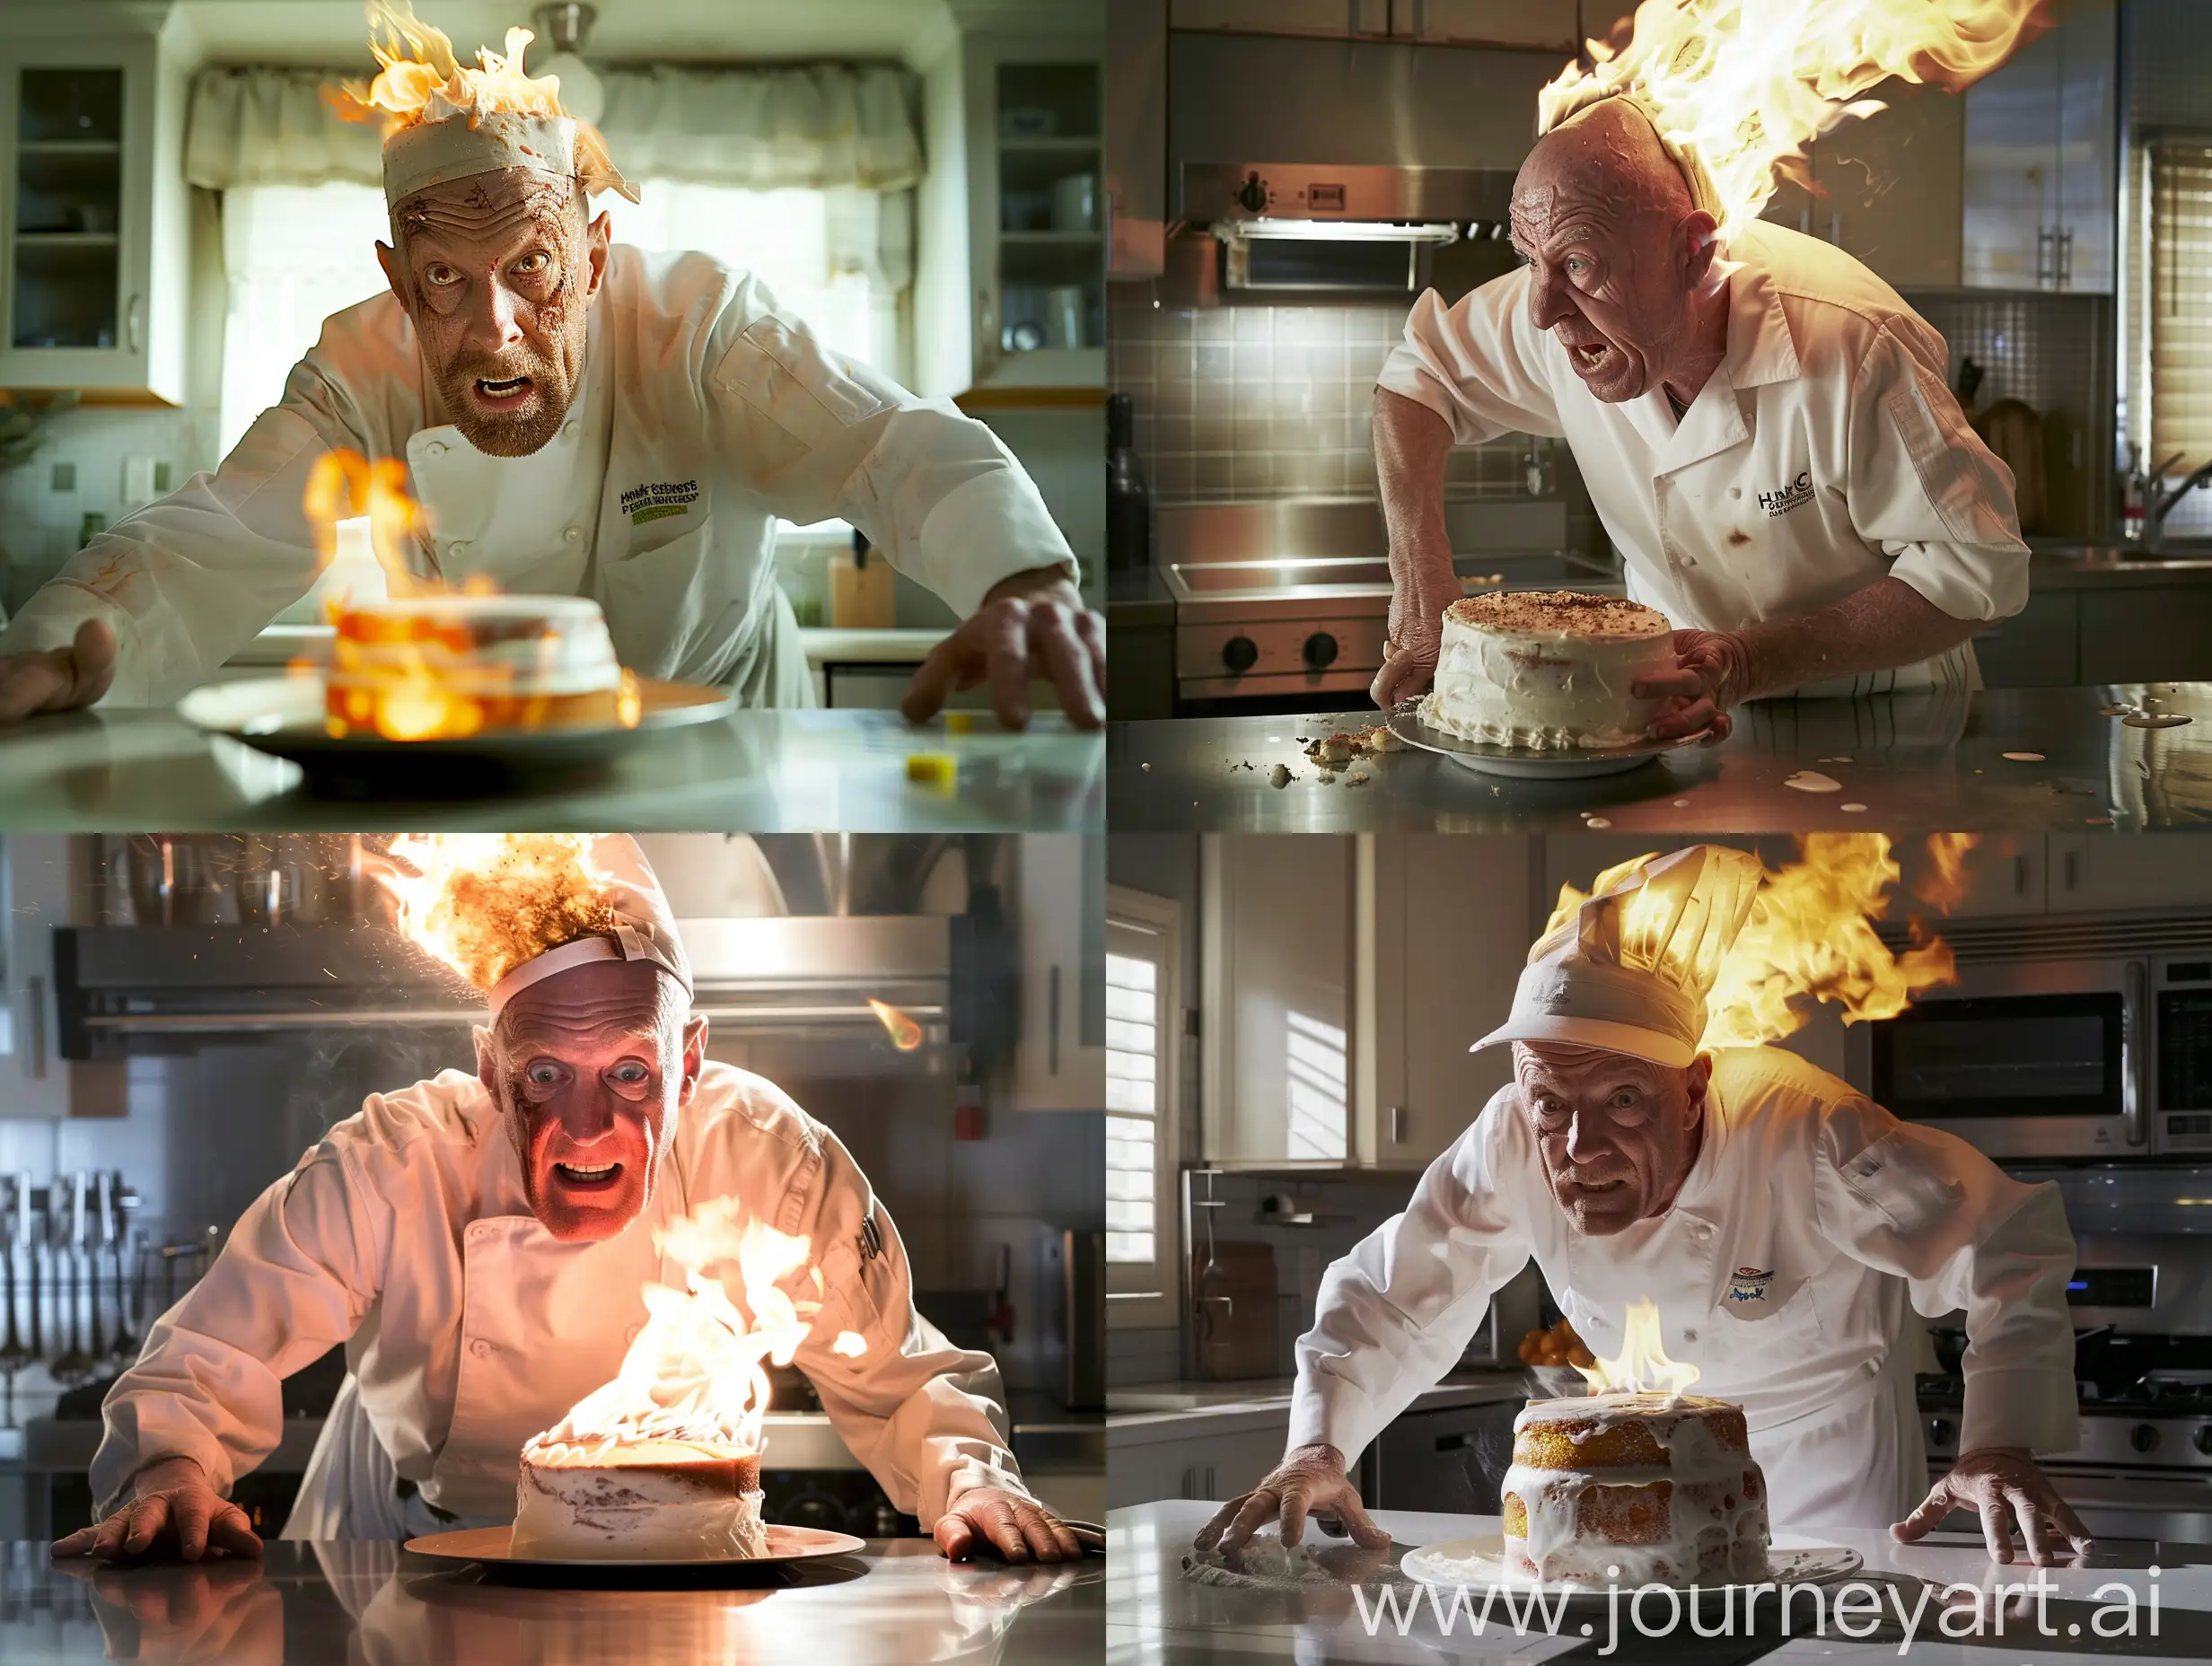 Hank Schrader (played by Dean Norris) in Breaking Bad, Hank Schrader is trying to put the cake in the oven, Hank Schrader's cooking hat is on fire. Hank Schrader wearing white cooking clothes, Hank Schrader's face is scary, kitchen background, clear, modern lighting, real, q2